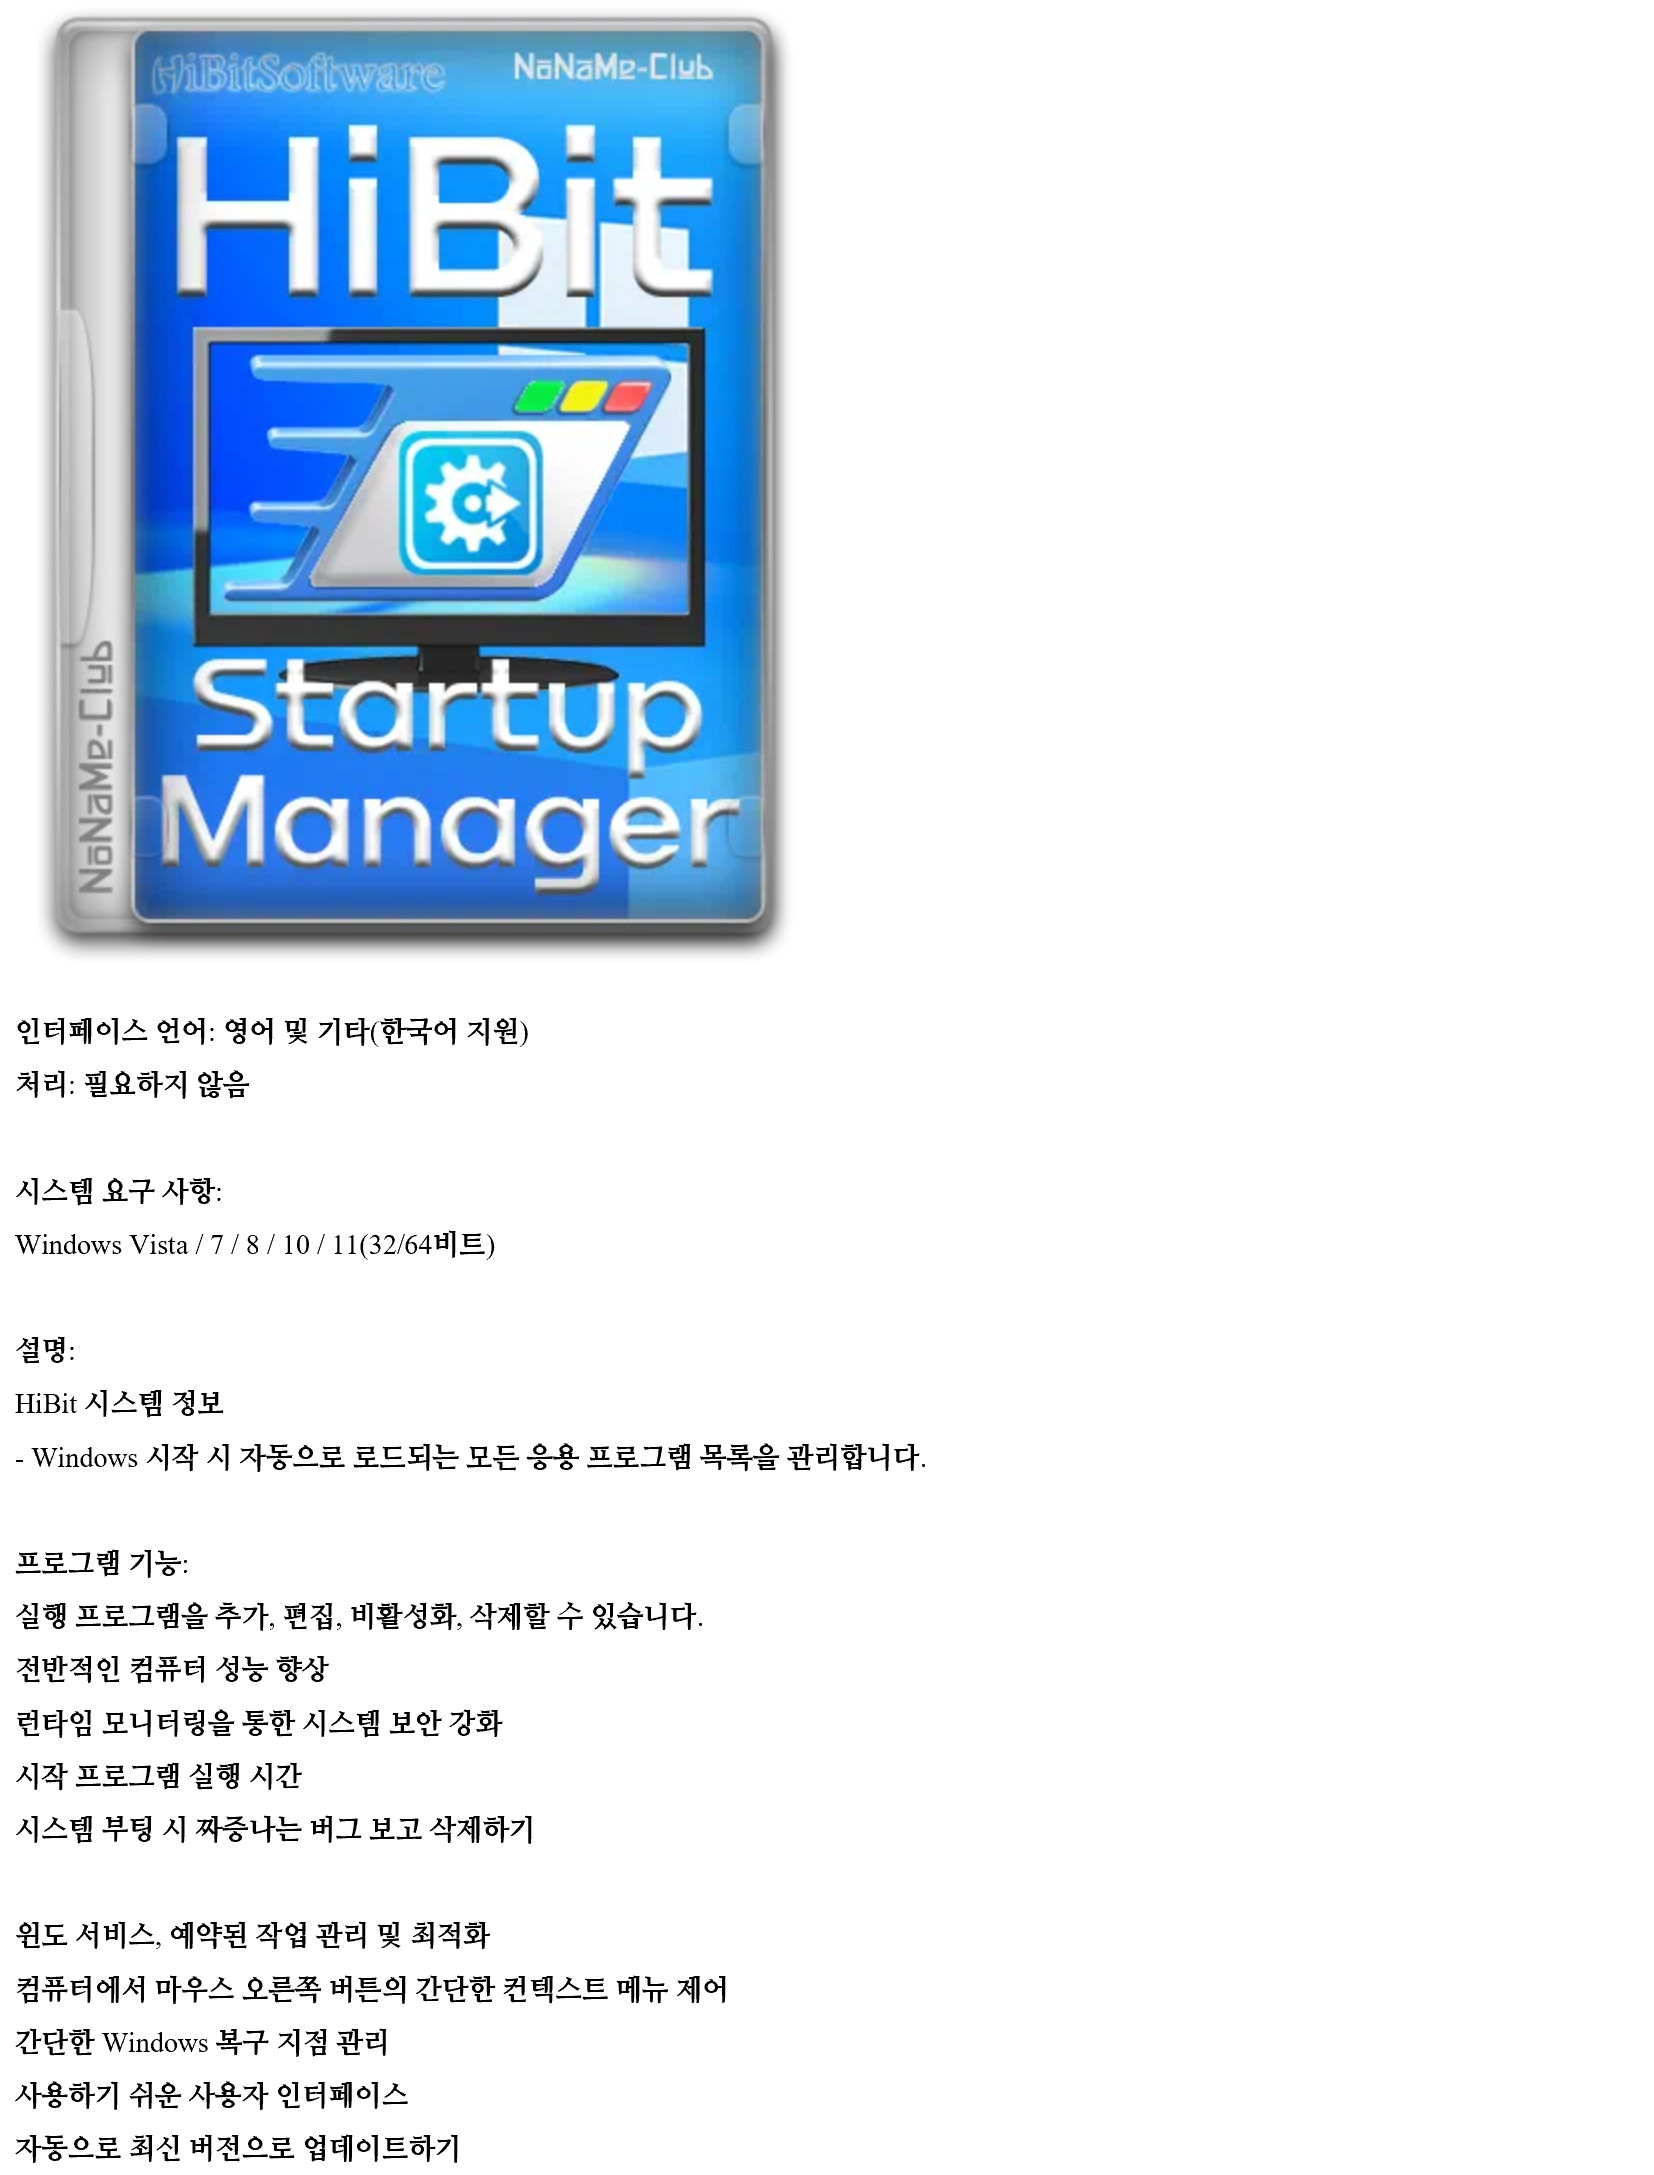 download the new for windows HiBit Startup Manager 2.6.20